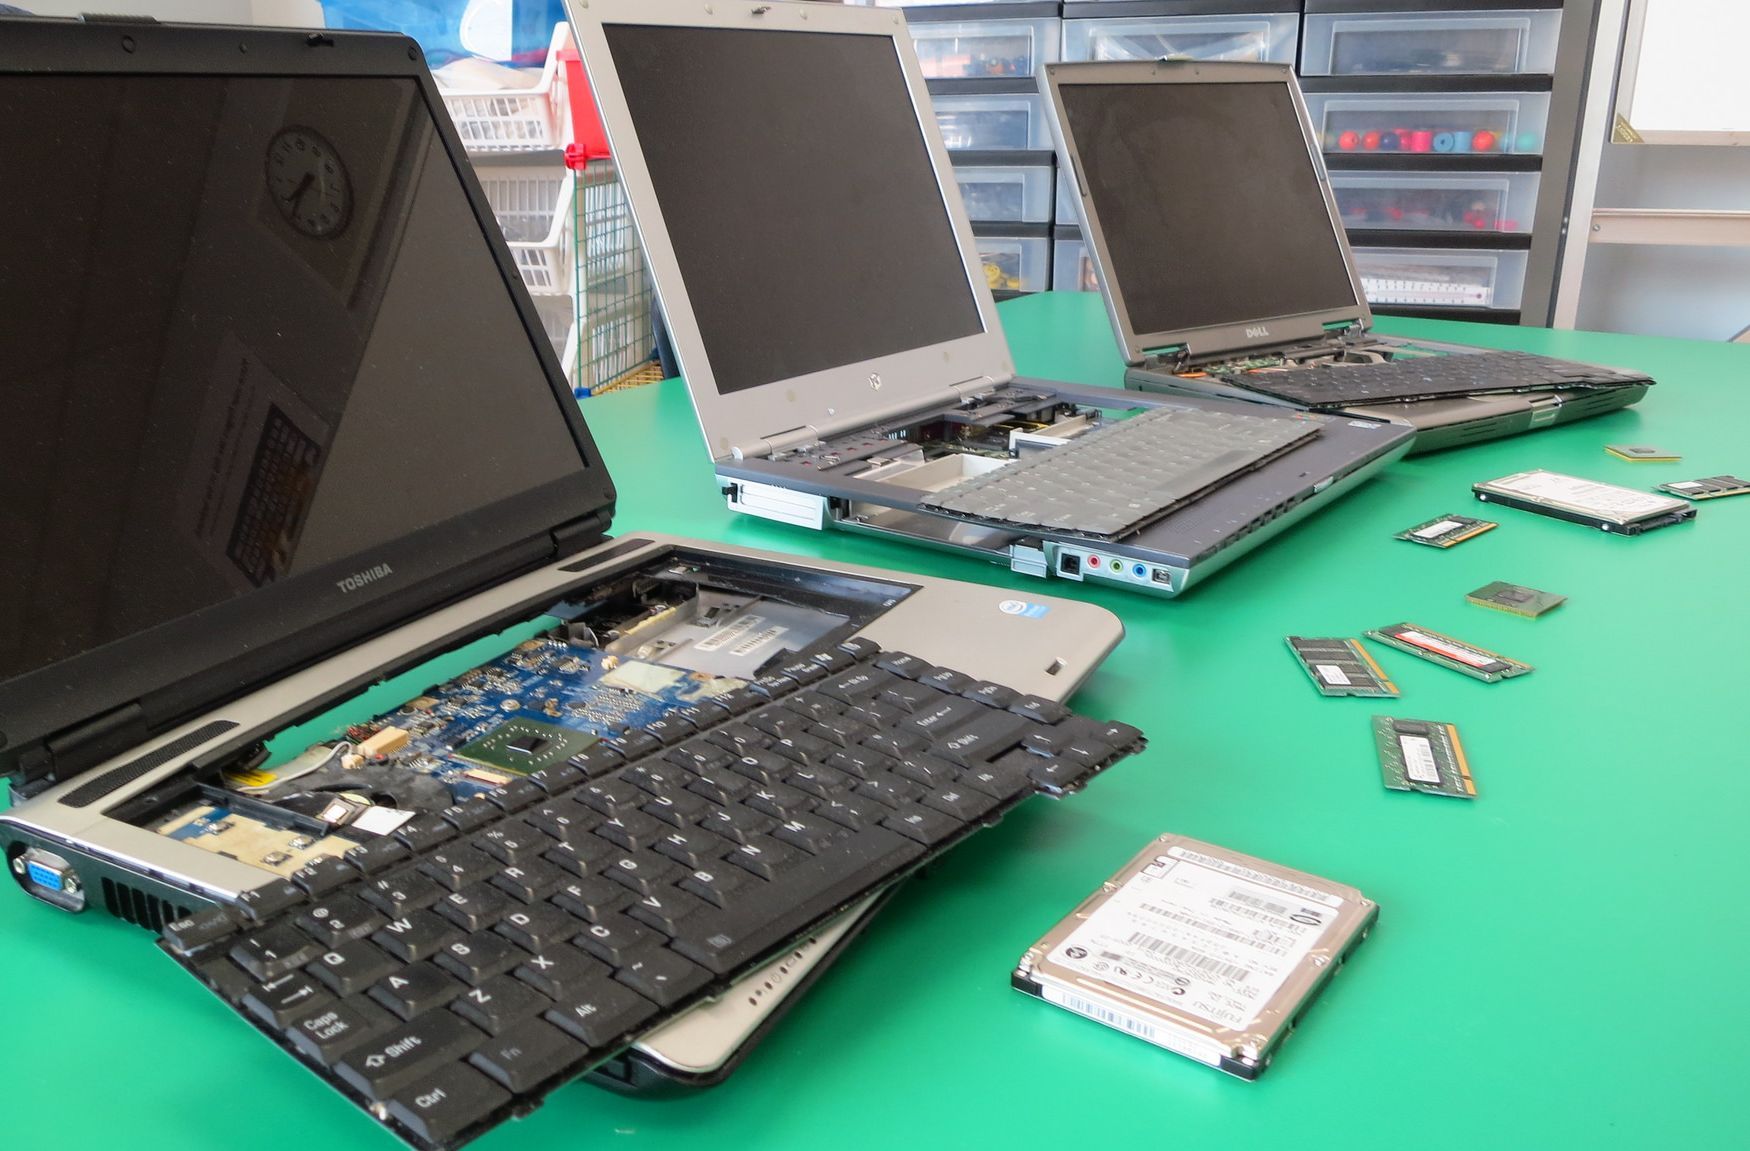 10 cheap or free ways to make an old PC run faster | PCWorld